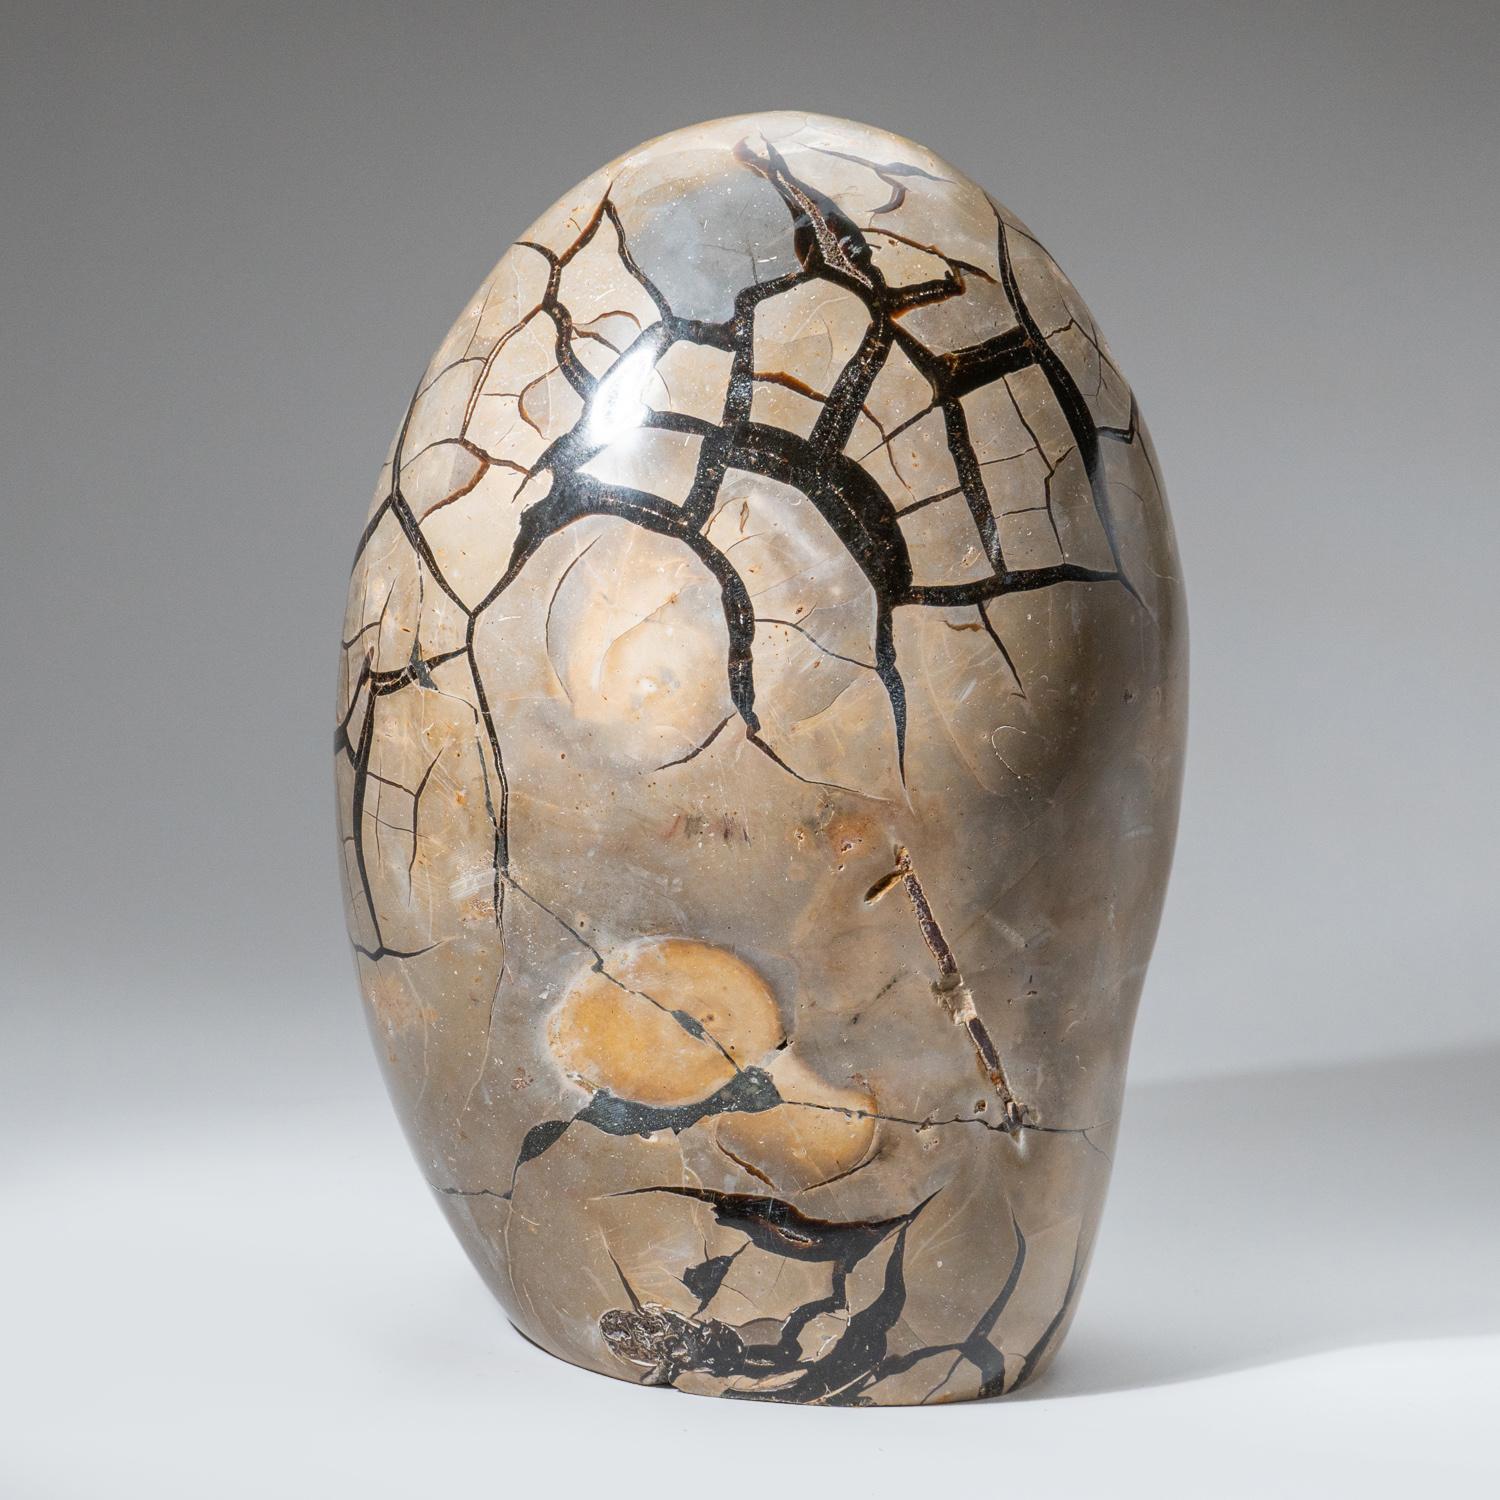 Contemporary Polished Septarian Druzy Geode Egg from Madagascar (35 lbs) For Sale